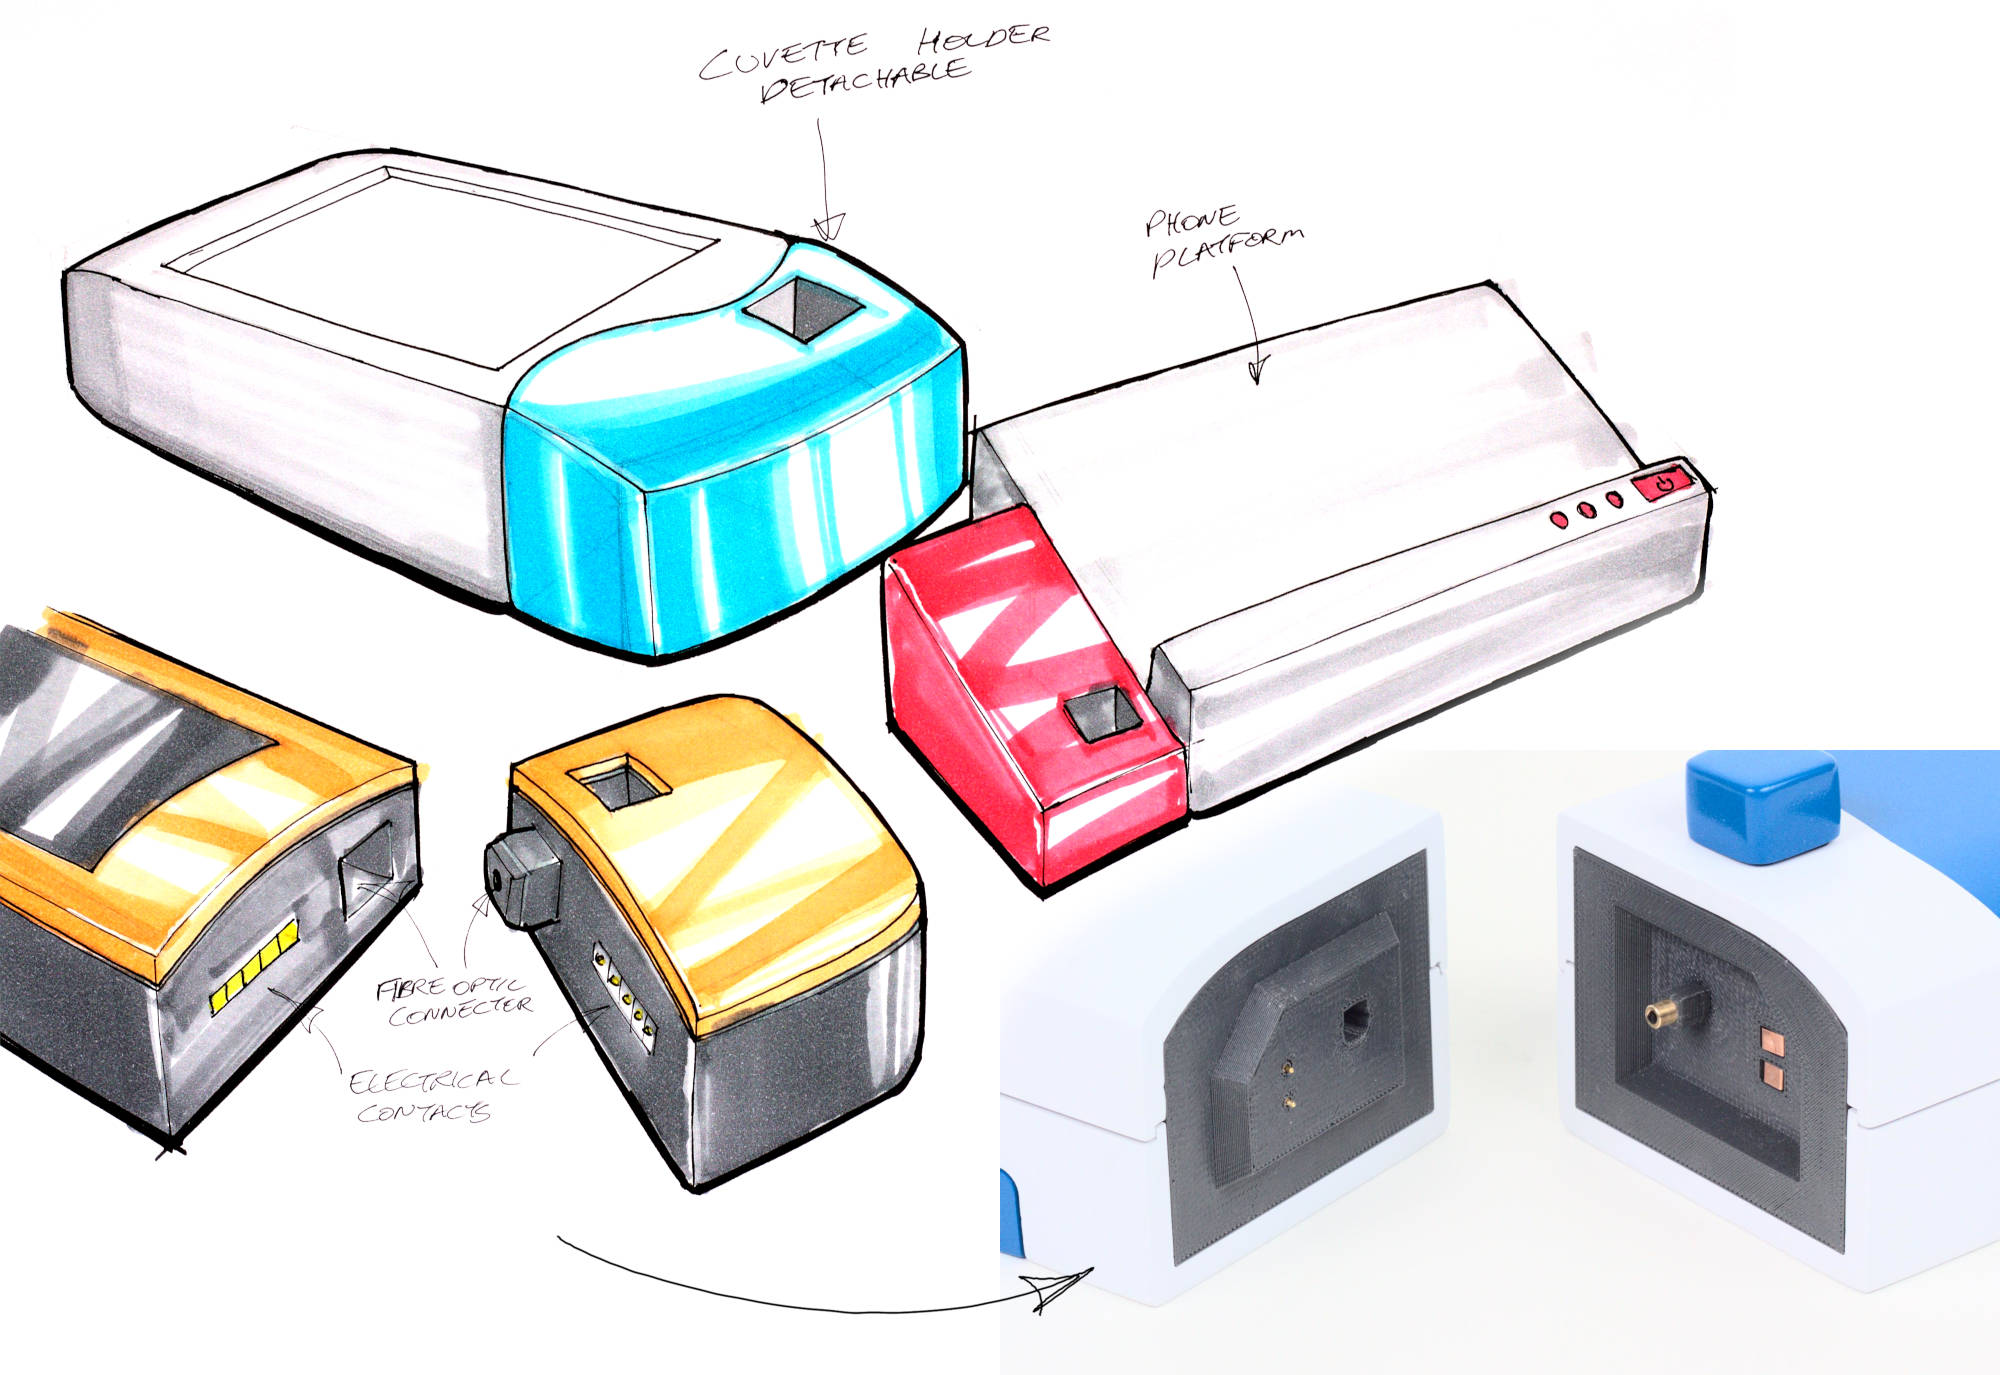 3 rendered sketches of the spectrometer, one of which shows the connector looking pretty much like the final prototype. A photo of the actual prototype's module connector is next to it.